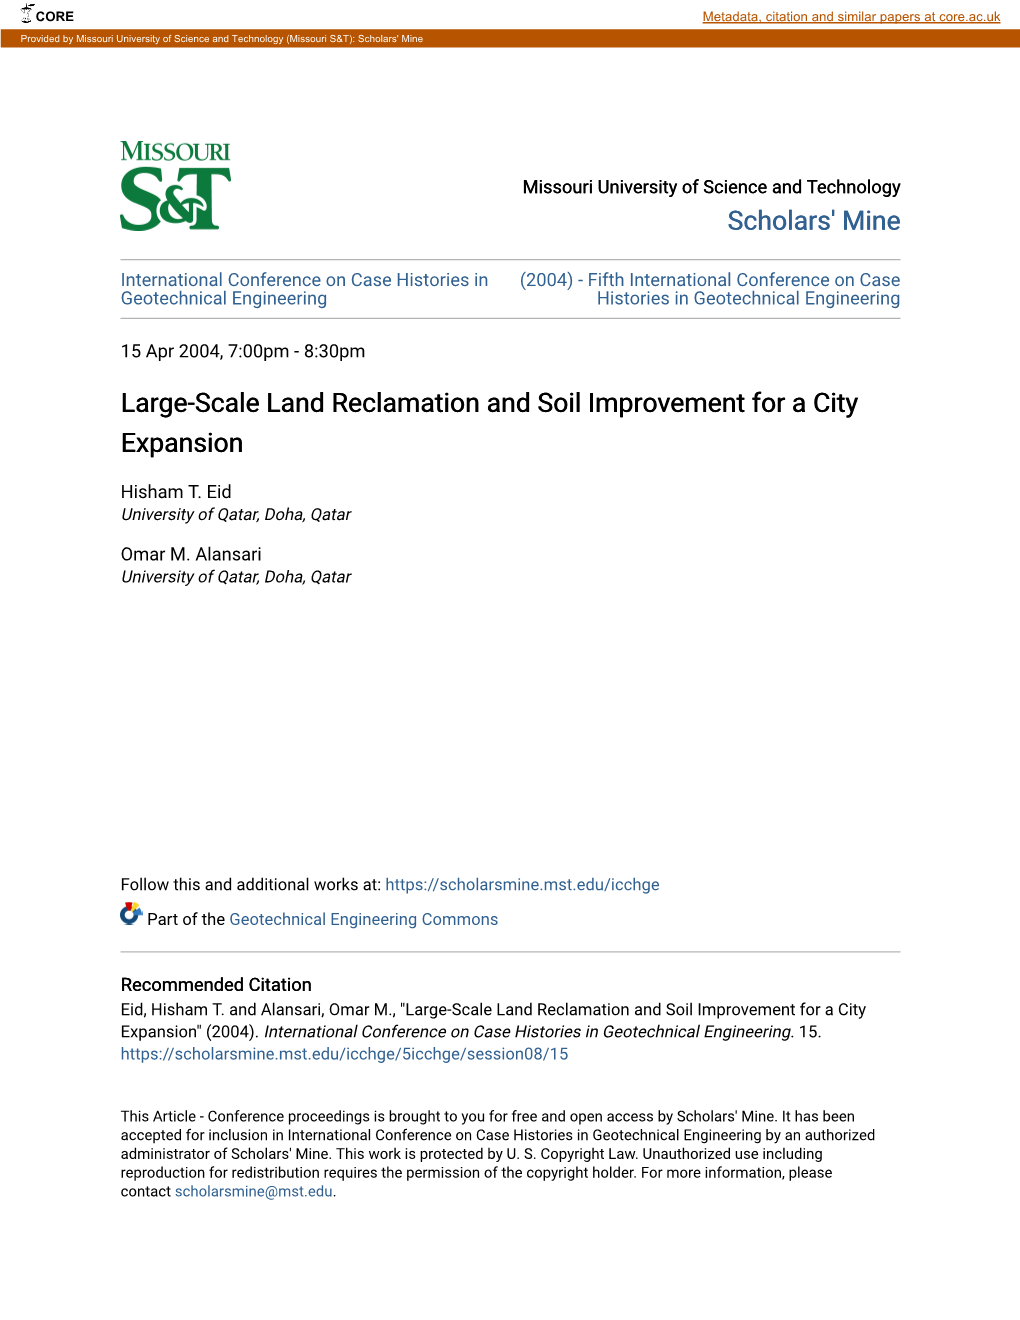 Large-Scale Land Reclamation and Soil Improvement for a City Expansion